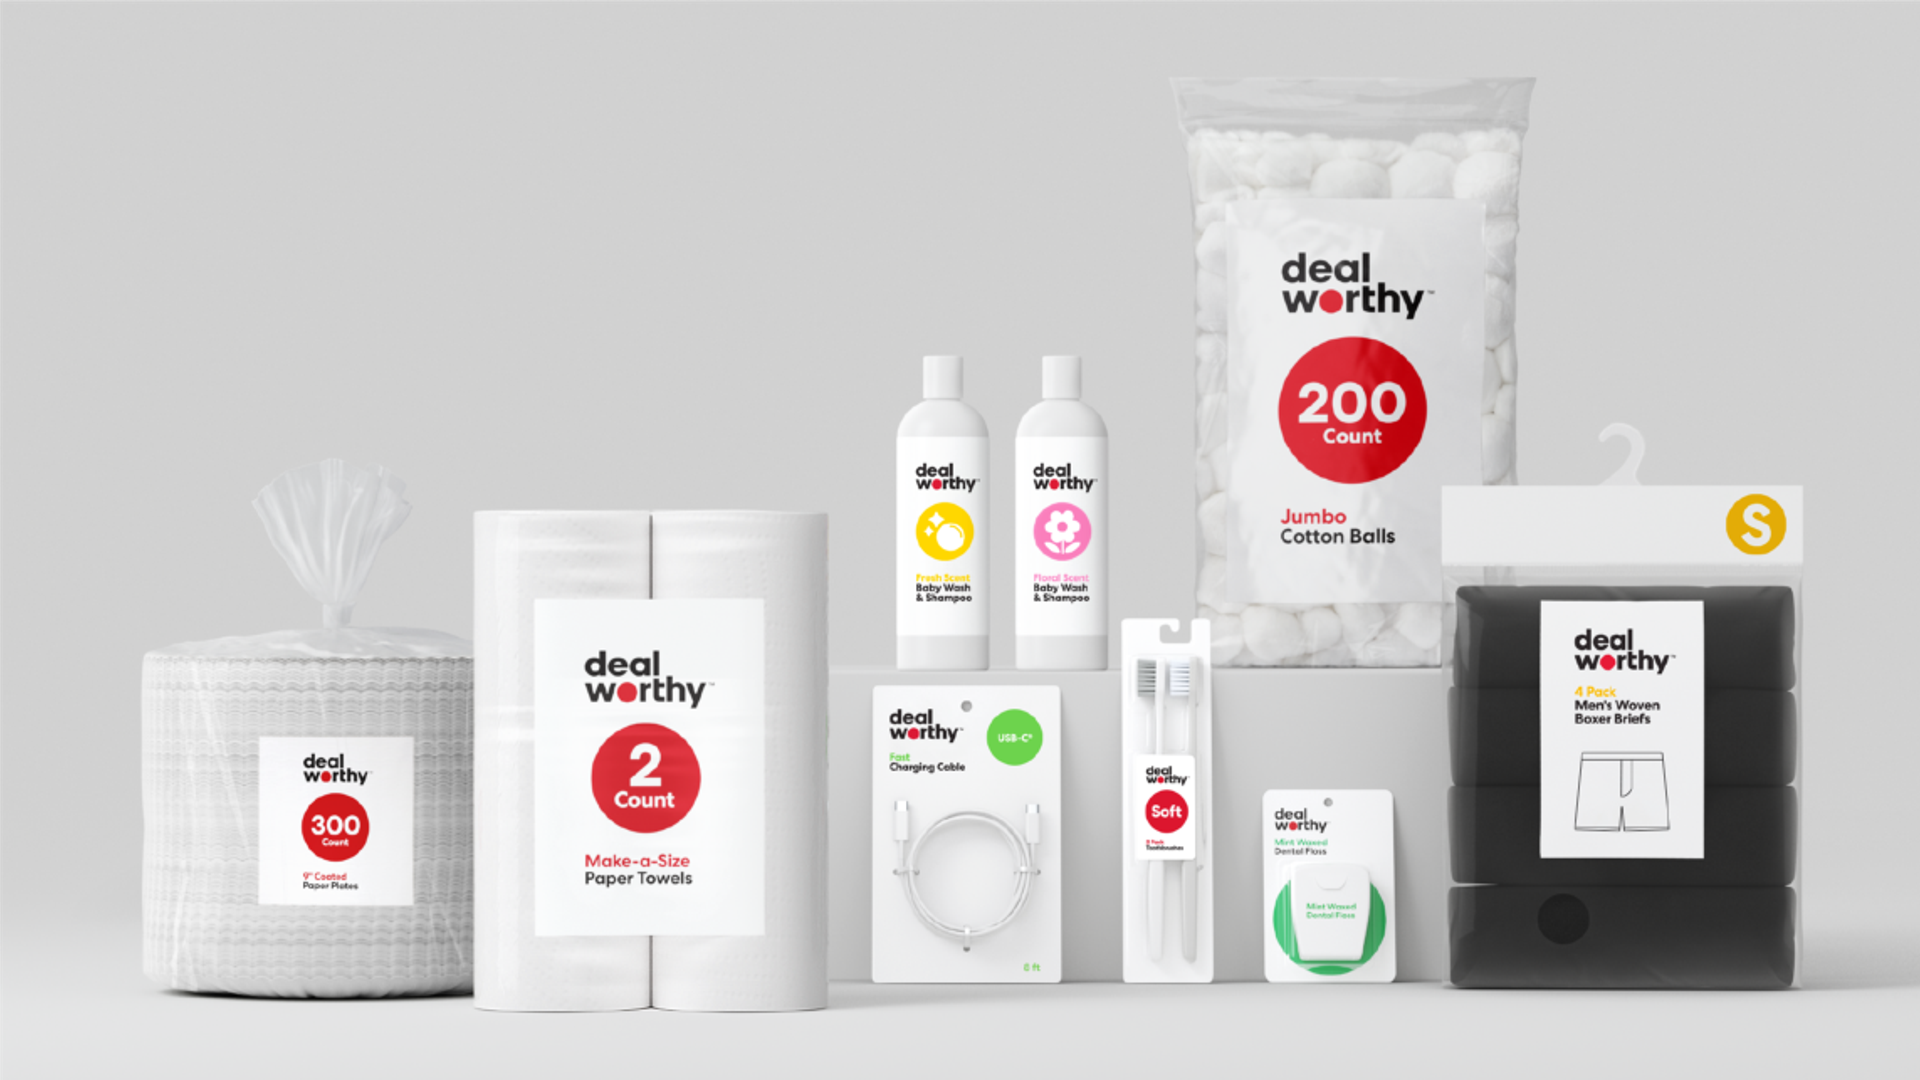 Featured image for Target Announces Value-Orientated Sub-Brand Called 'dealworthy'